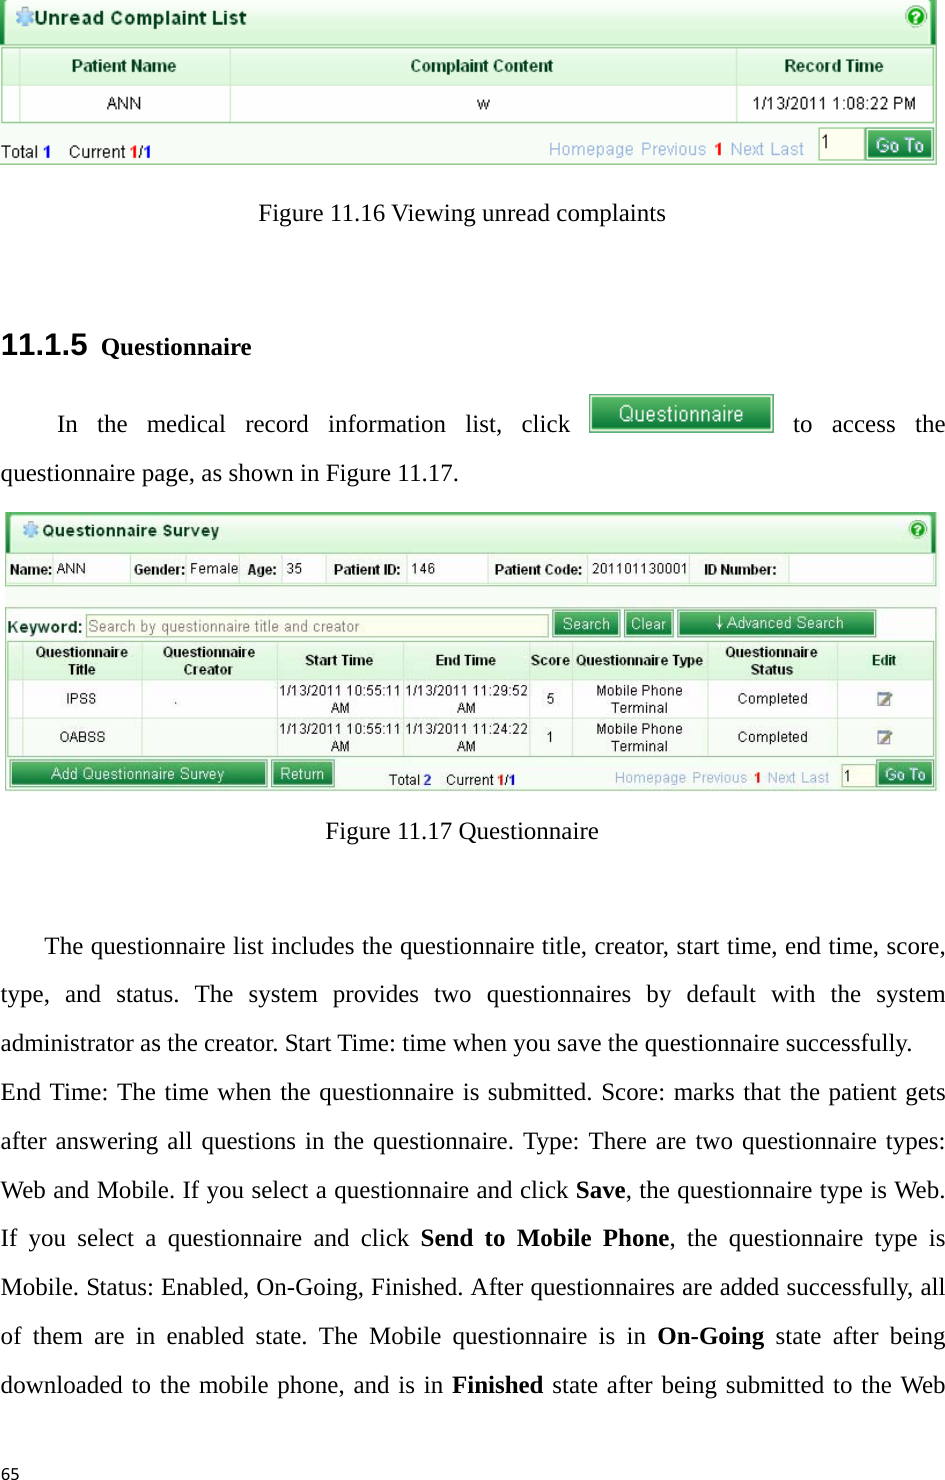 65 Figure 11.16 Viewing unread complaints  11.1.5  Questionnaire In the medical record information list, click   to access the questionnaire page, as shown in Figure 11.17.    Figure 11.17 Questionnaire    The questionnaire list includes the questionnaire title, creator, start time, end time, score, type, and status. The system provides two questionnaires by default with the system administrator as the creator. Start Time: time when you save the questionnaire successfully. End Time: The time when the questionnaire is submitted. Score: marks that the patient gets after answering all questions in the questionnaire. Type: There are two questionnaire types: Web and Mobile. If you select a questionnaire and click Save, the questionnaire type is Web. If you select a questionnaire and click Send to Mobile Phone, the questionnaire type is Mobile. Status: Enabled, On-Going, Finished. After questionnaires are added successfully, all of them are in enabled state. The Mobile questionnaire is in On-Going state after being downloaded to the mobile phone, and is in Finished state after being submitted to the Web 